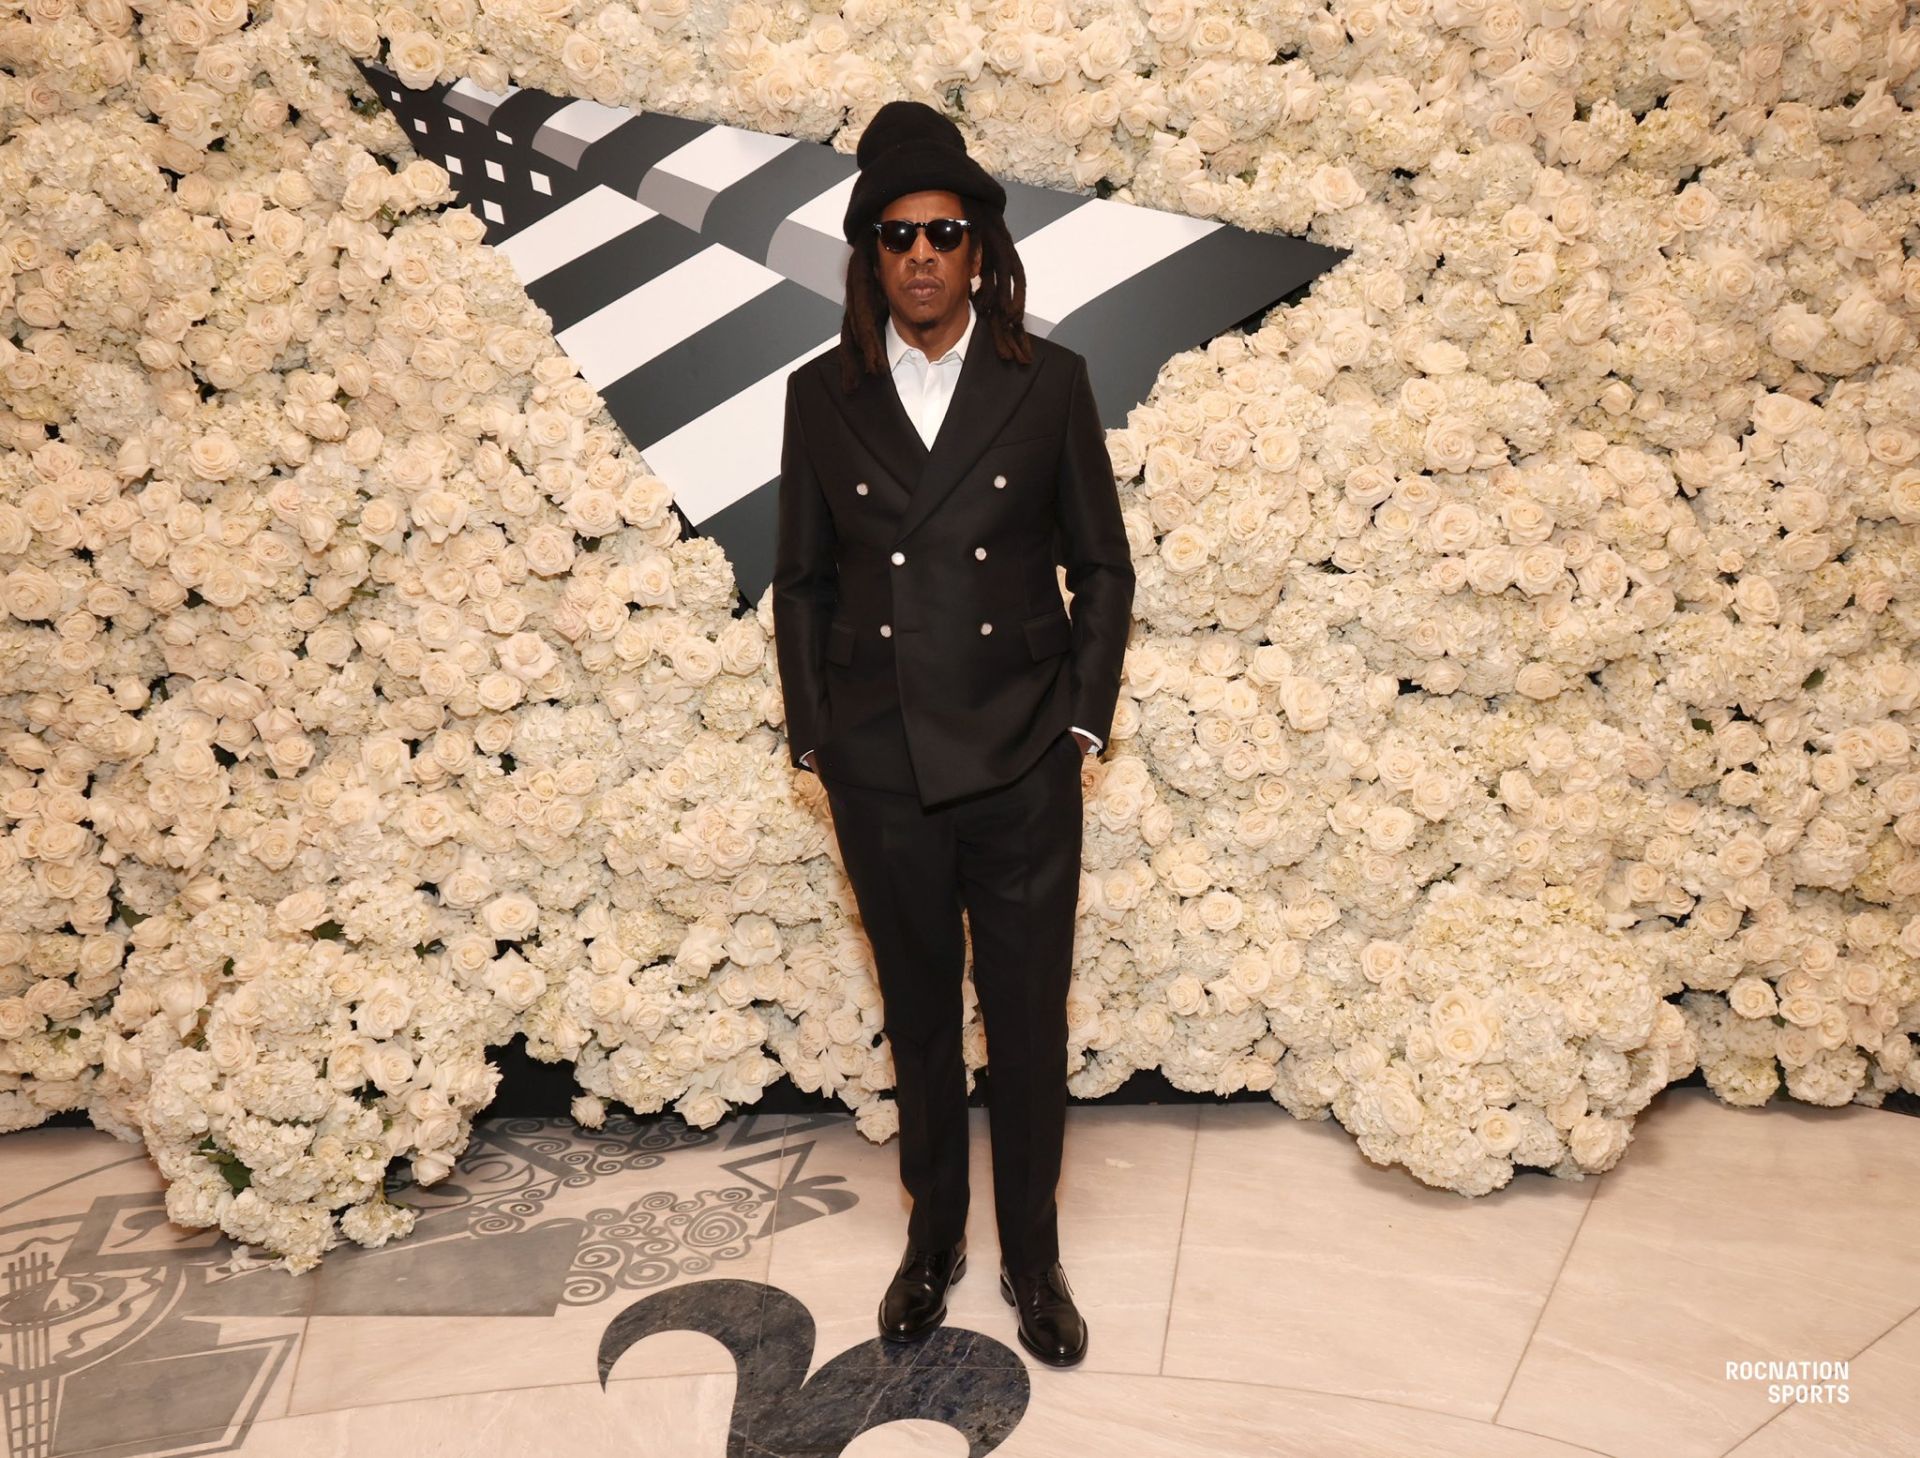 Jay-Z Hosts Roc Nation'S Sports Super Bowl Party Attended By Several Hollywood A-Listers, Yours Truly, News, March 2, 2024